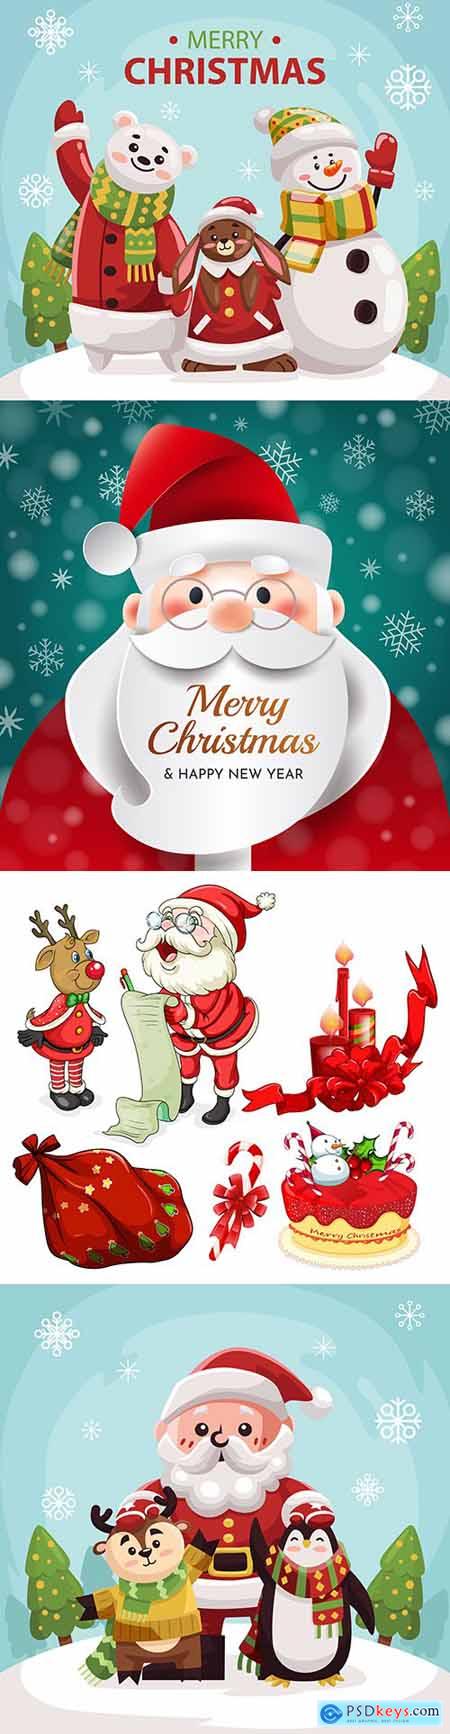 Santa Claus on Christmas background for your greeting card